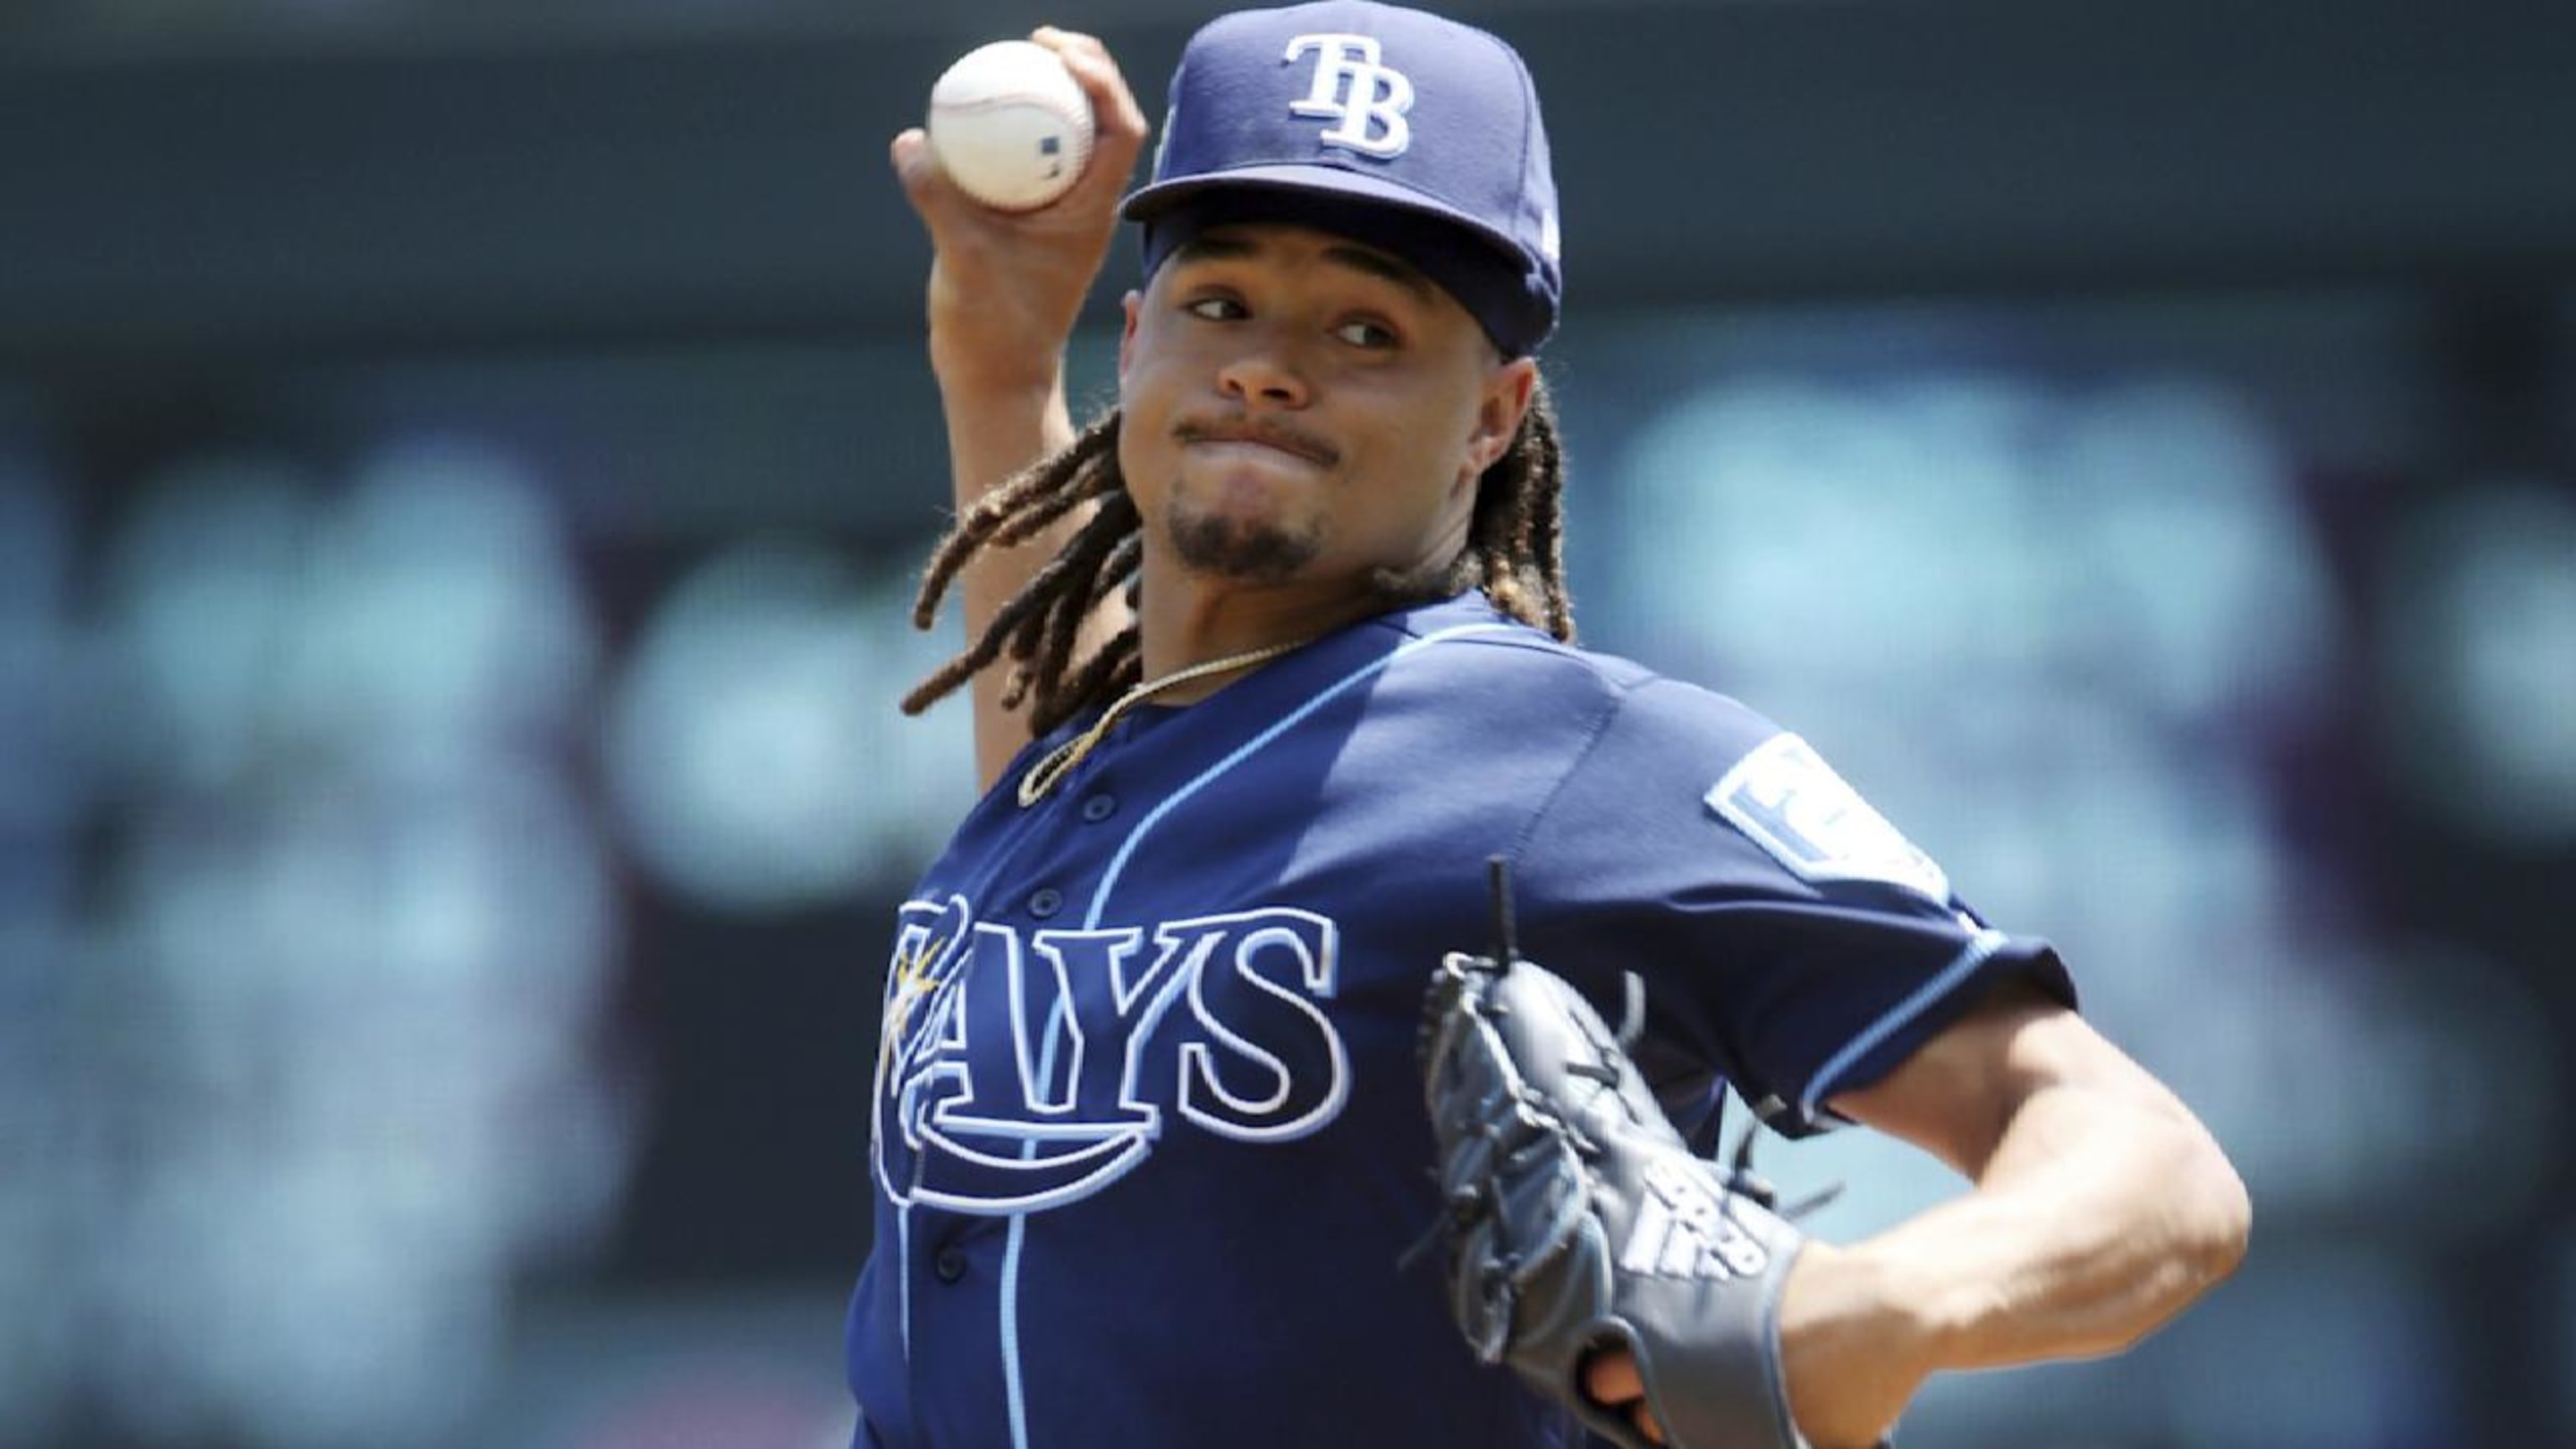 Rays' Chris Archer taking All-Star selection as his just reward